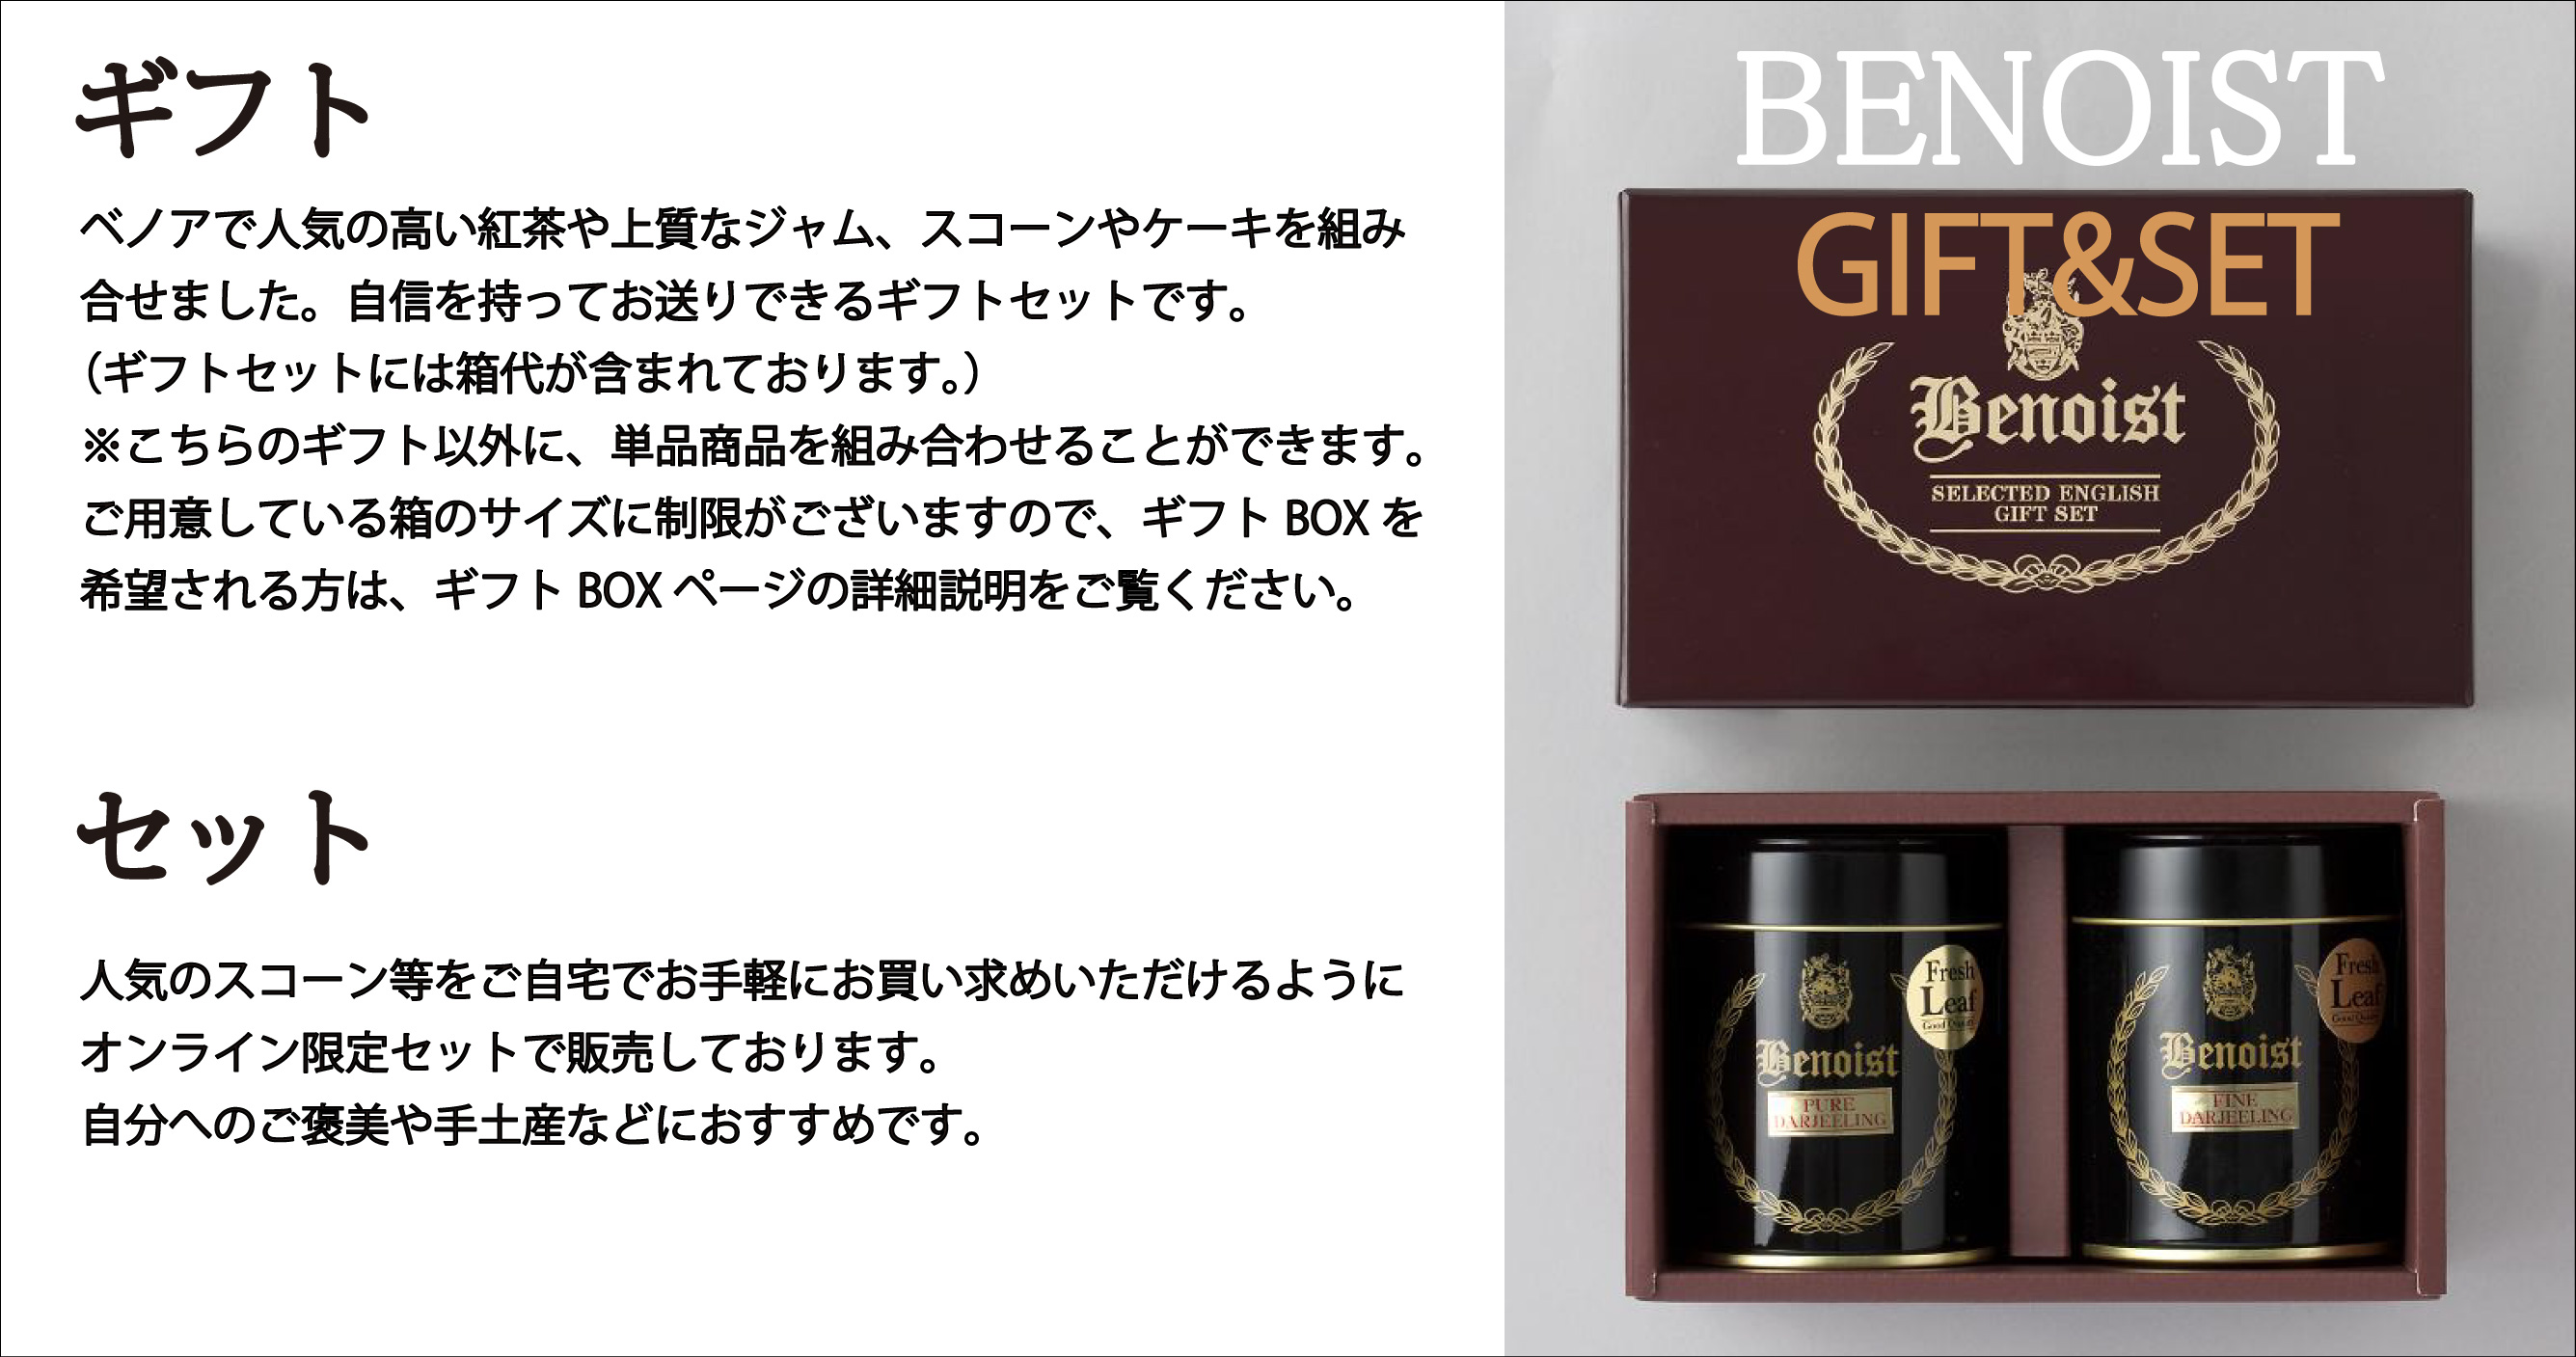 Gift ギフト